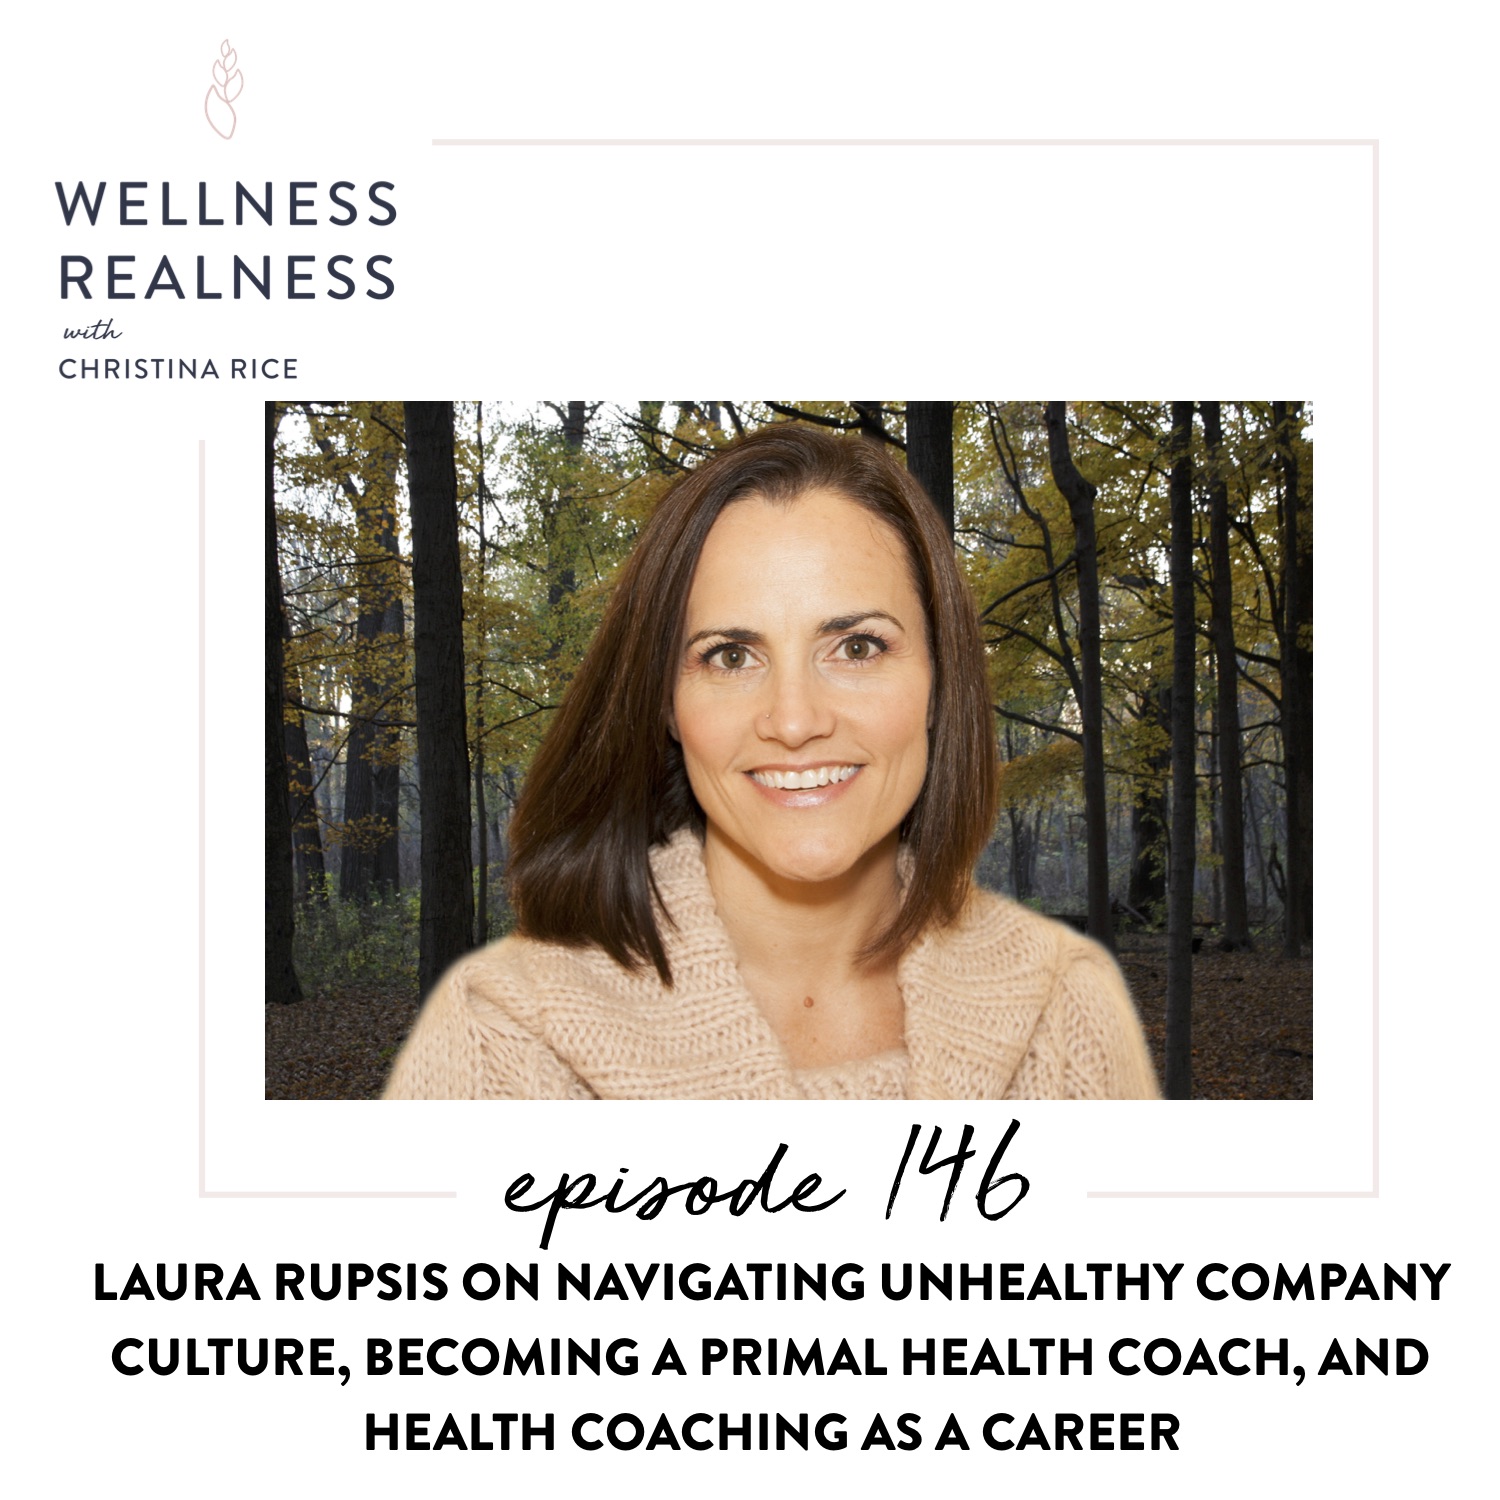 146: Laura Rupsis on Navigating Unhealthy Company Culture, Becoming a Primal Health Coach, and Health Coaching as a Career